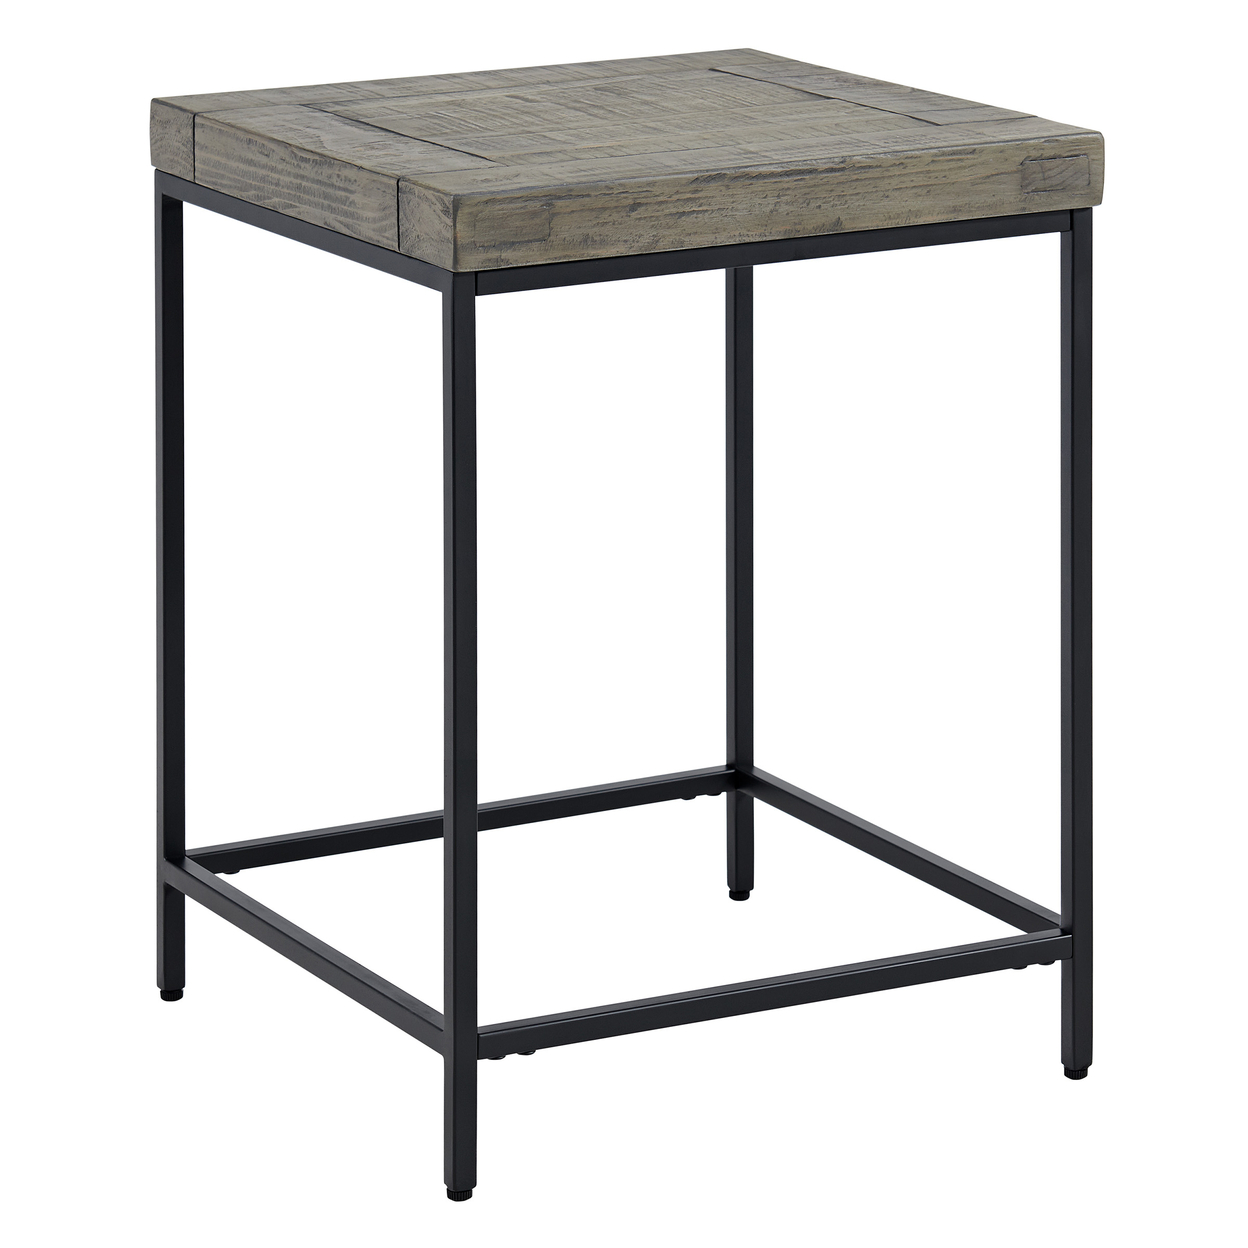 End Table Industrial Modern Side Table Wood Top Metal Frame For All Room, Gray